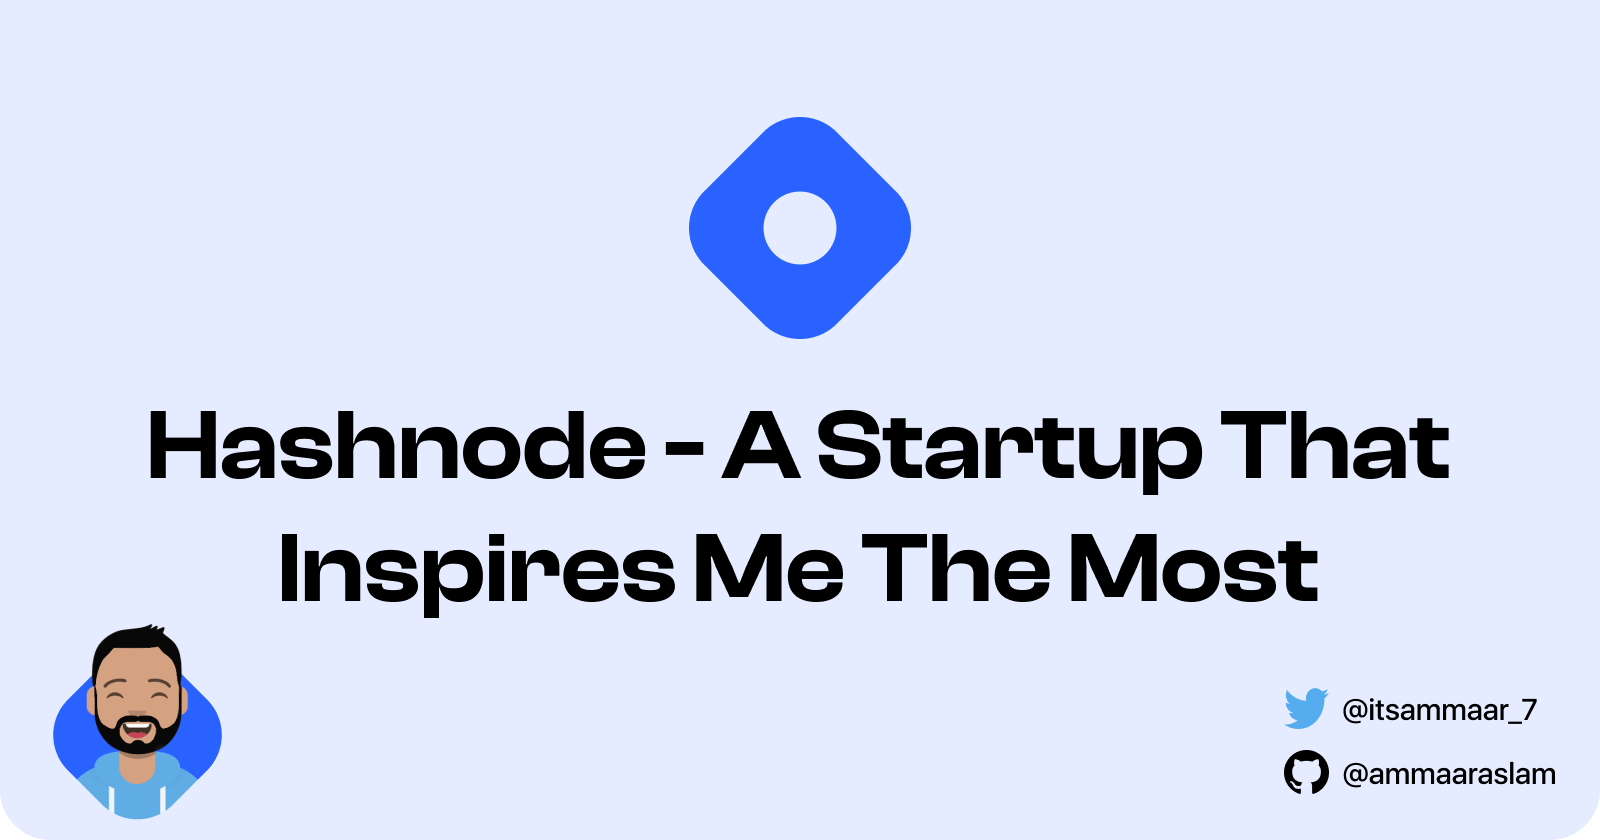 Hashnode - A Startup That Inspires Me The Most